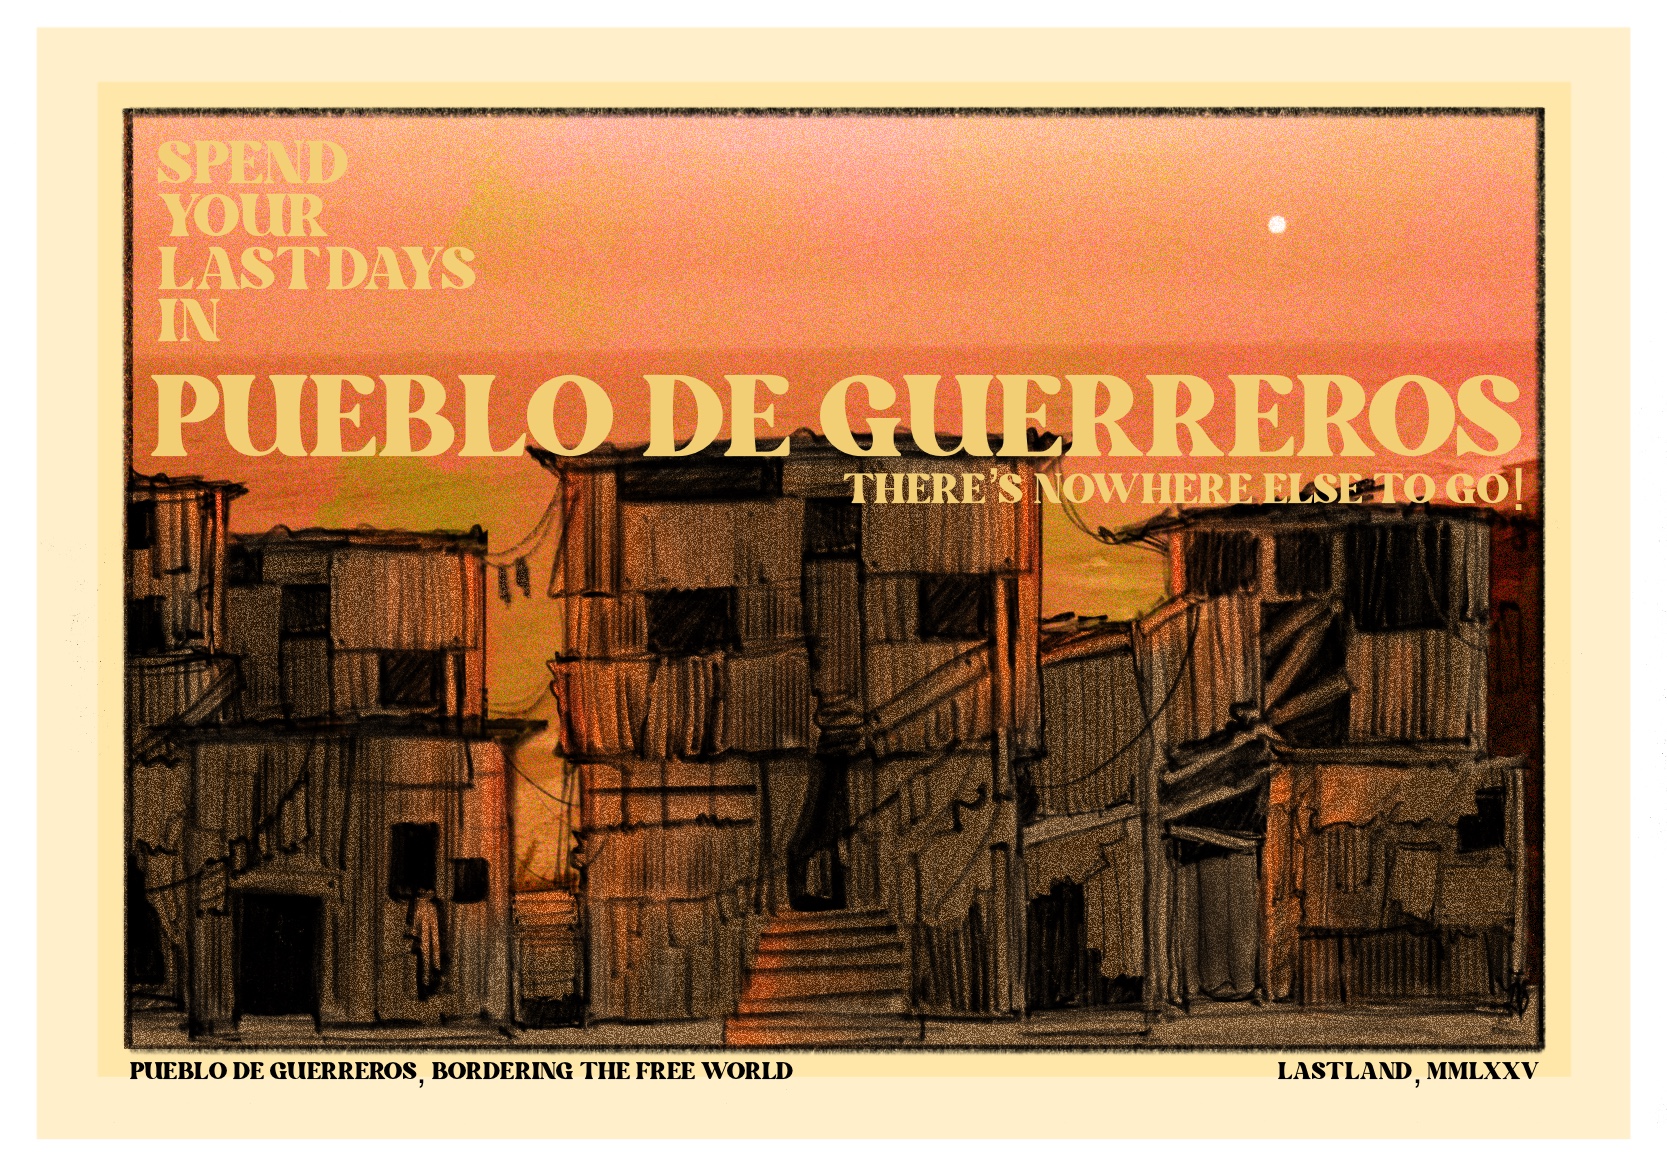 An illustrated postcard featuring a platform view of a slum like village by Indi B. The buildings are on stilts in the ocean. There is a sunset over the village.